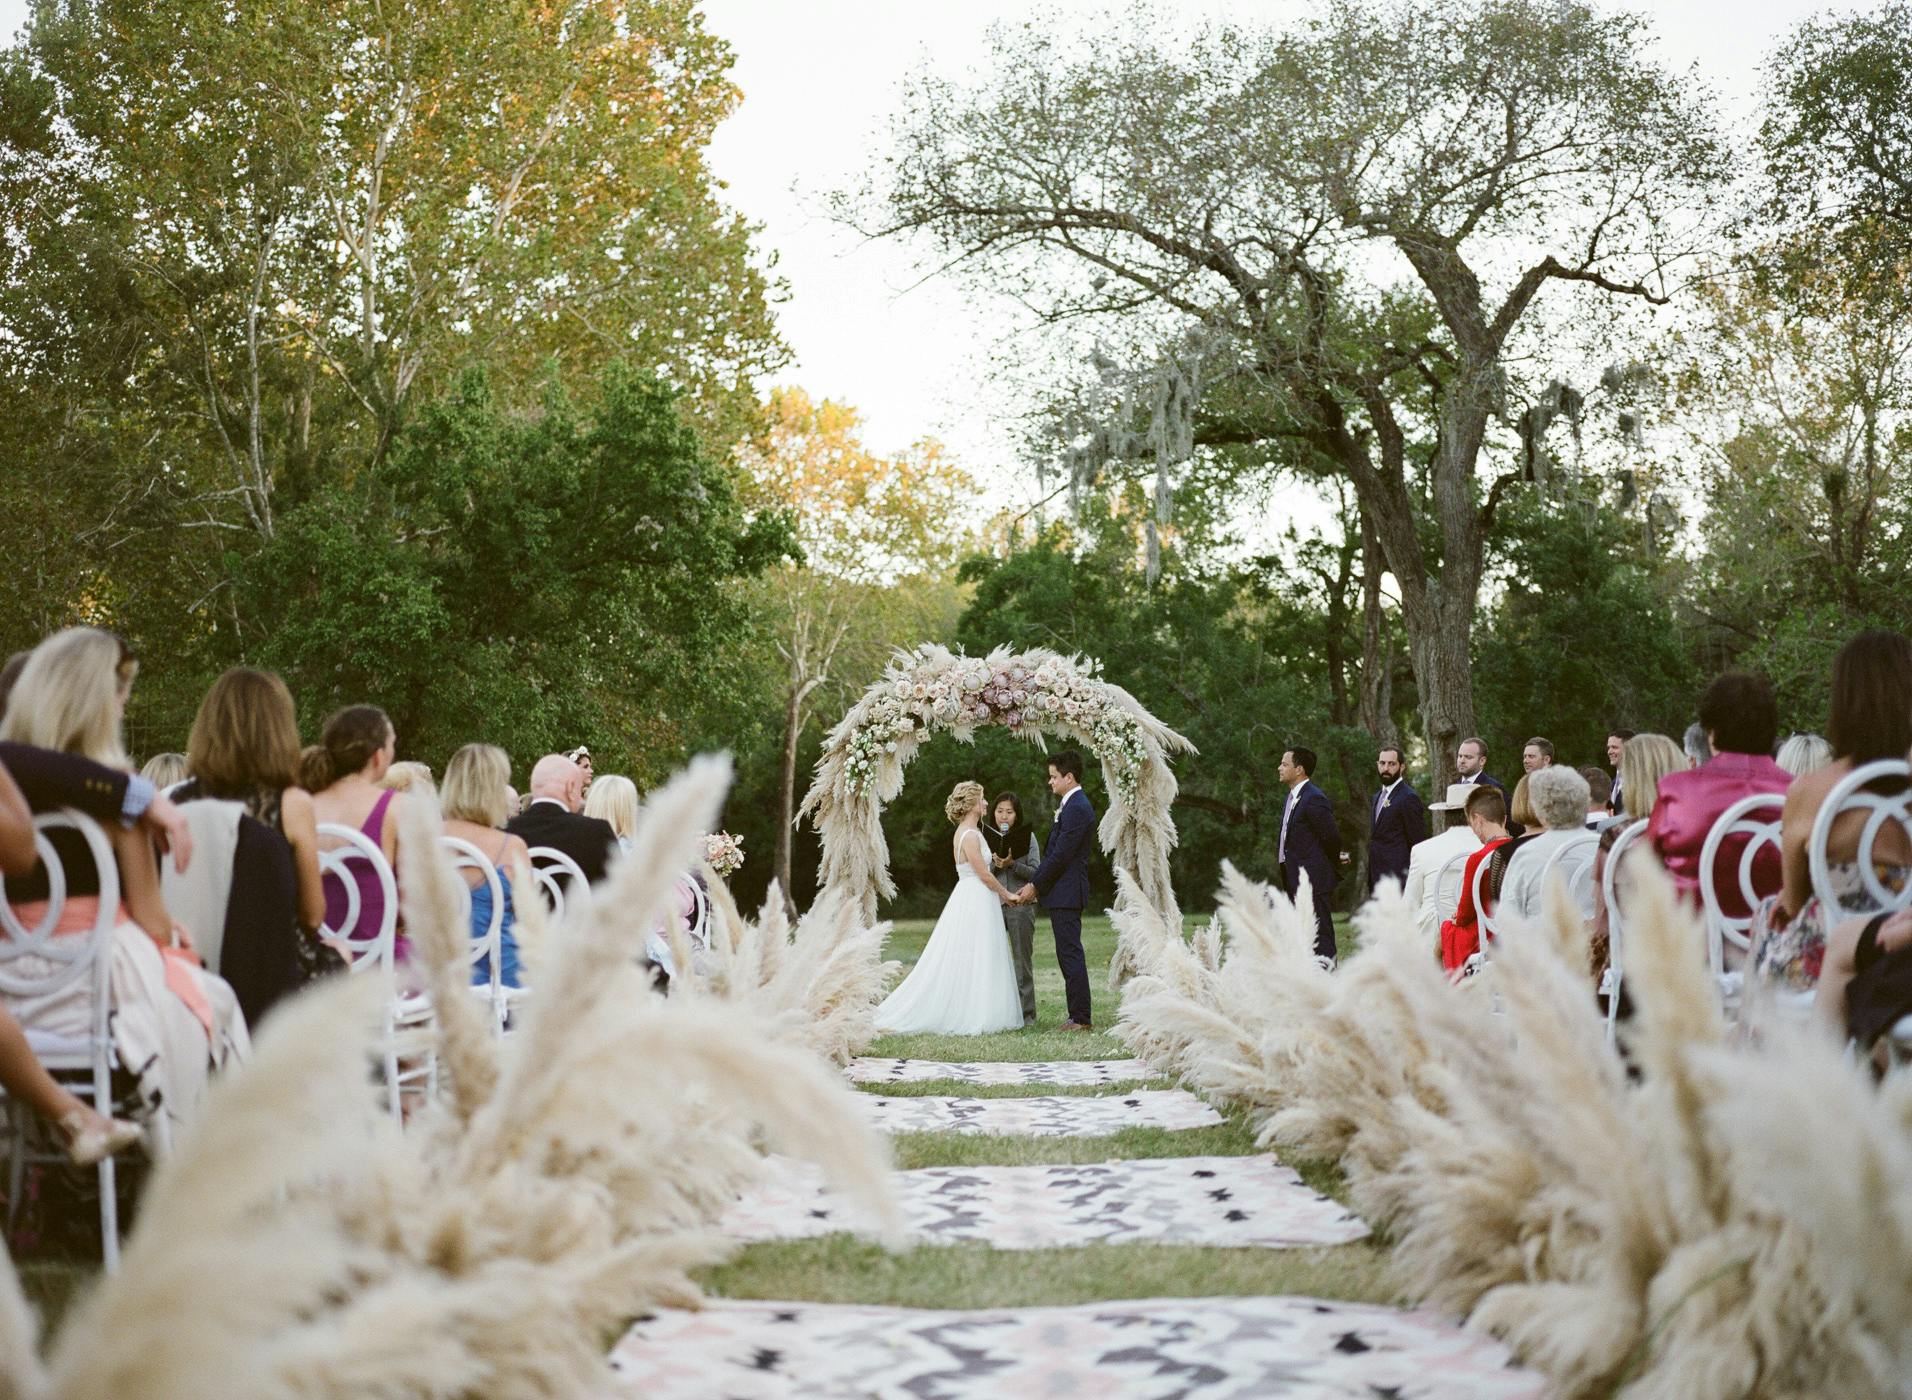 Rustic outdoor wedding with pampas grass and a wedding aisle covered in boho throw rugs | PartySlate